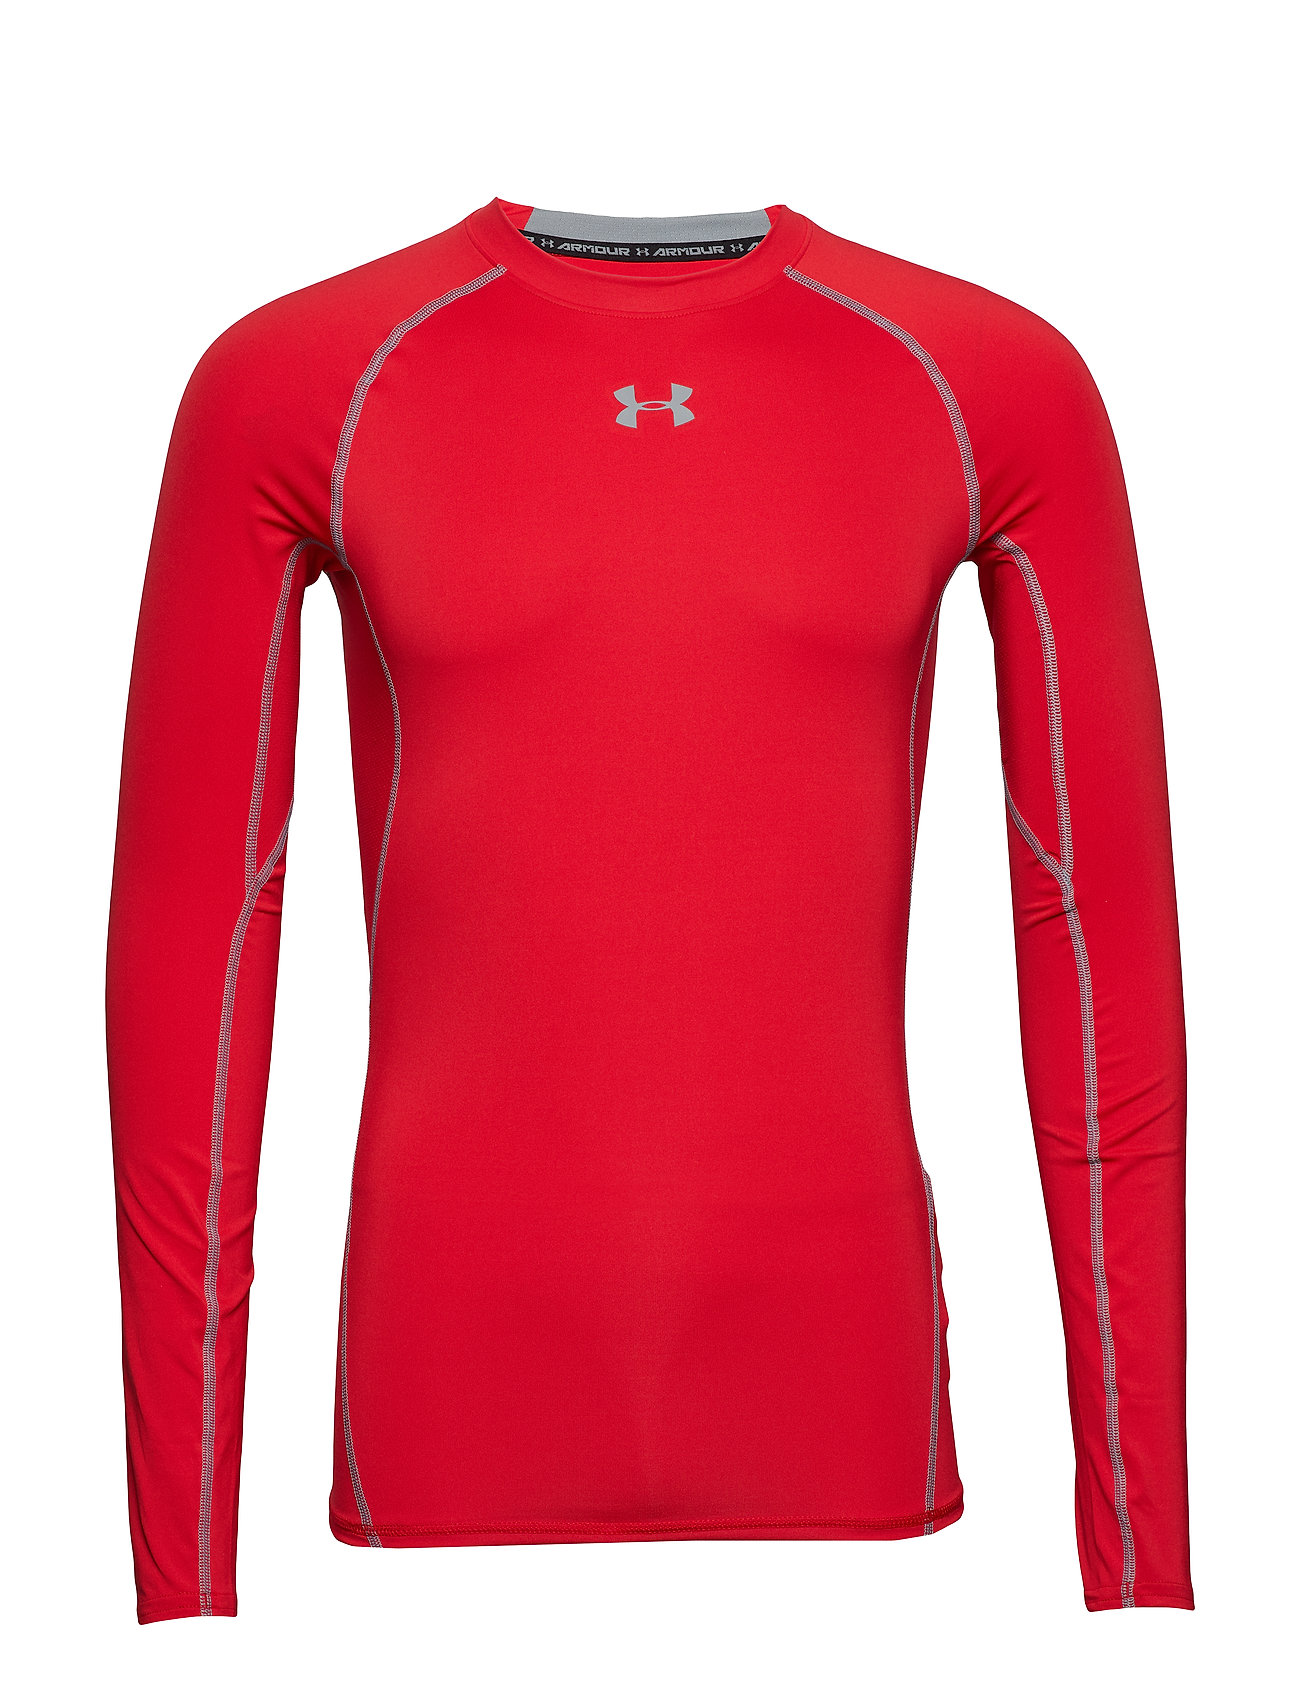 Under Armour Ua Hg Armour Ls (Red), (26 